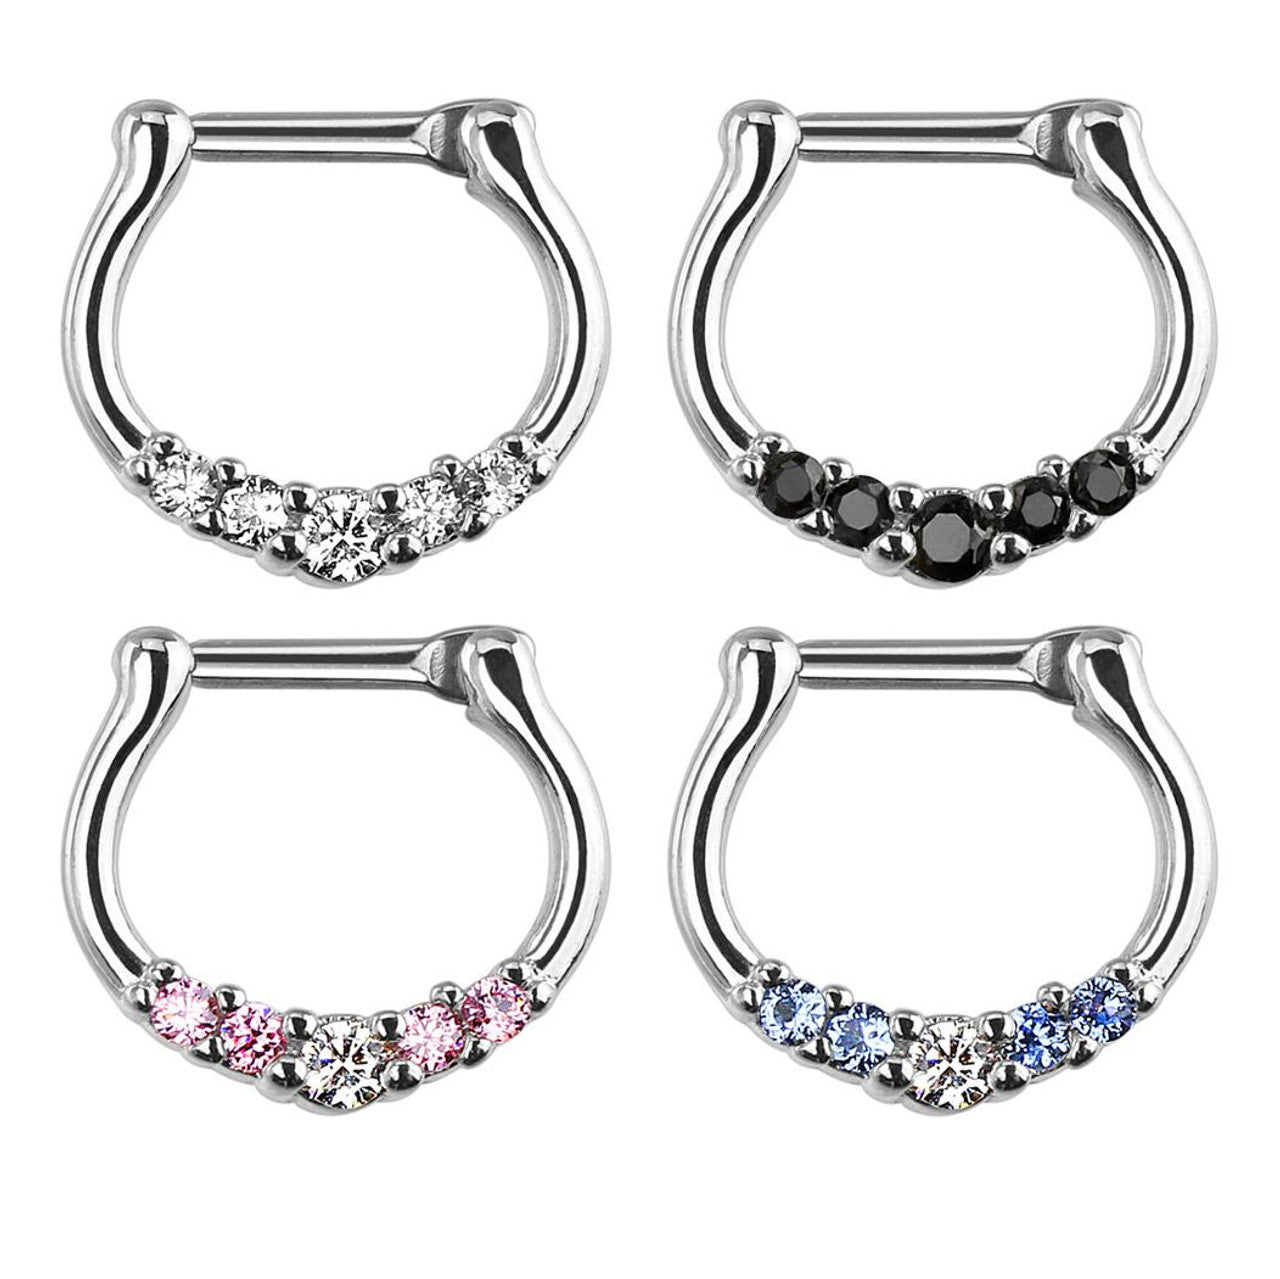 Surgical Steel Septum Clicker Ring 16 Gauge with 5 CZ Gems